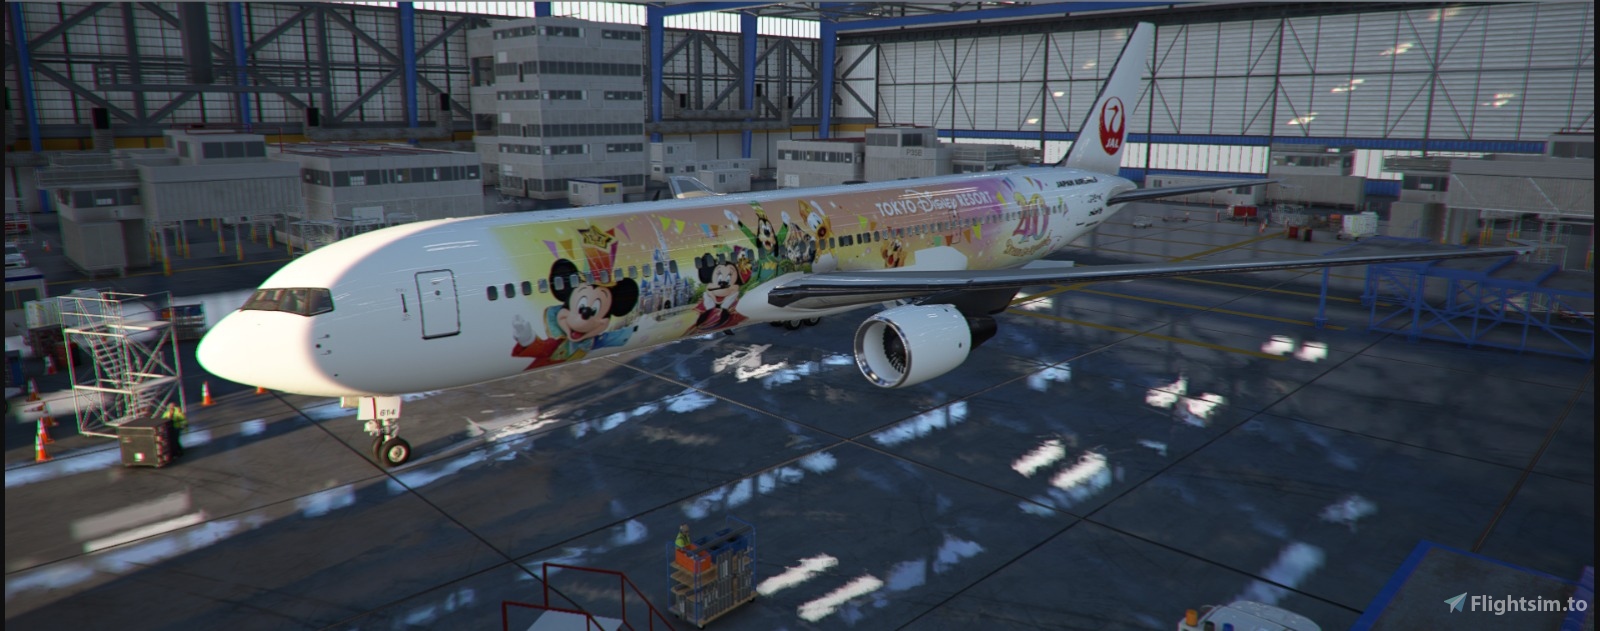 The Loli Airlines Adventure